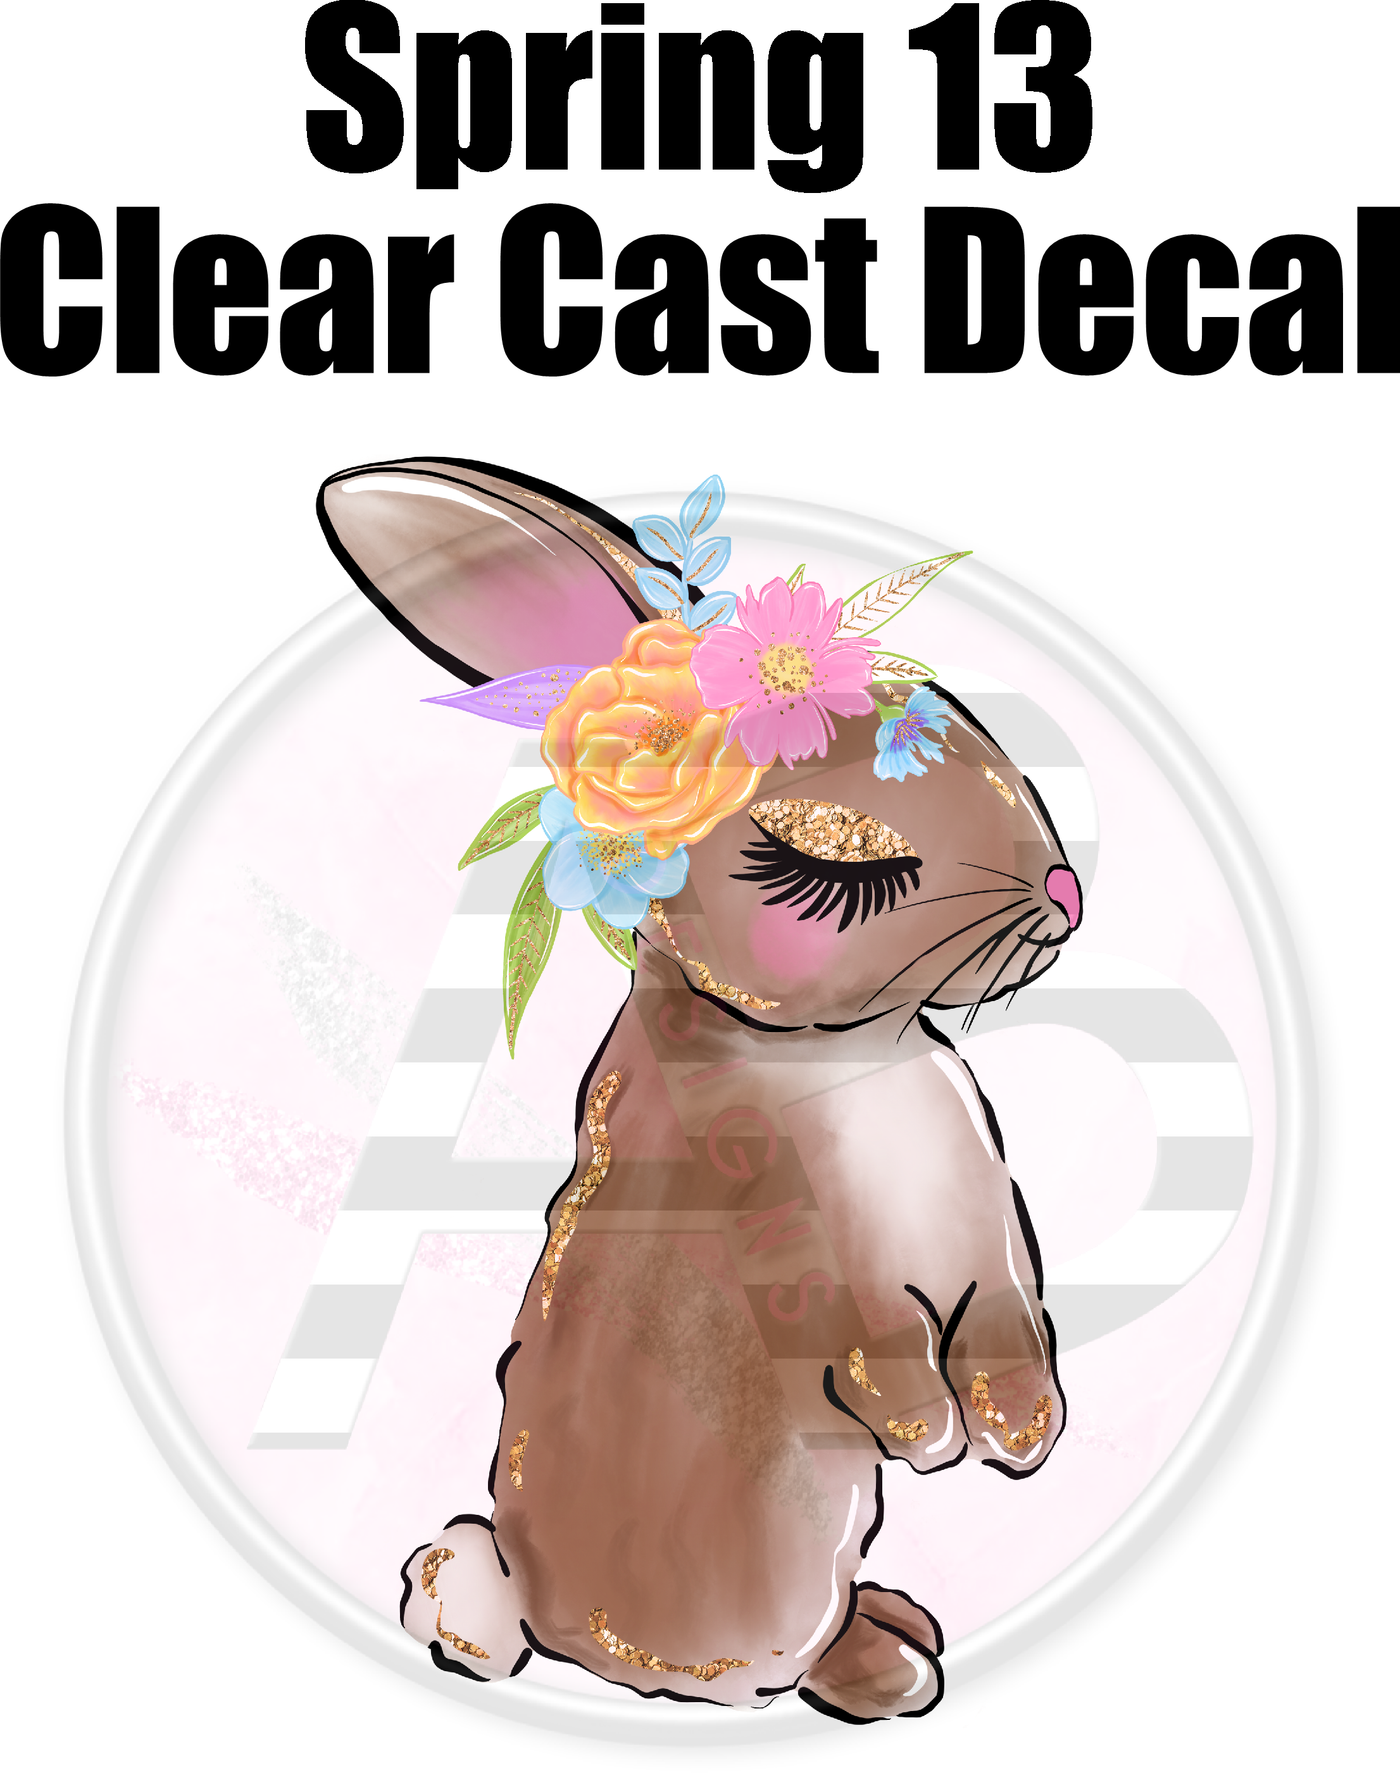 Spring 13 - Clear Cast Decal